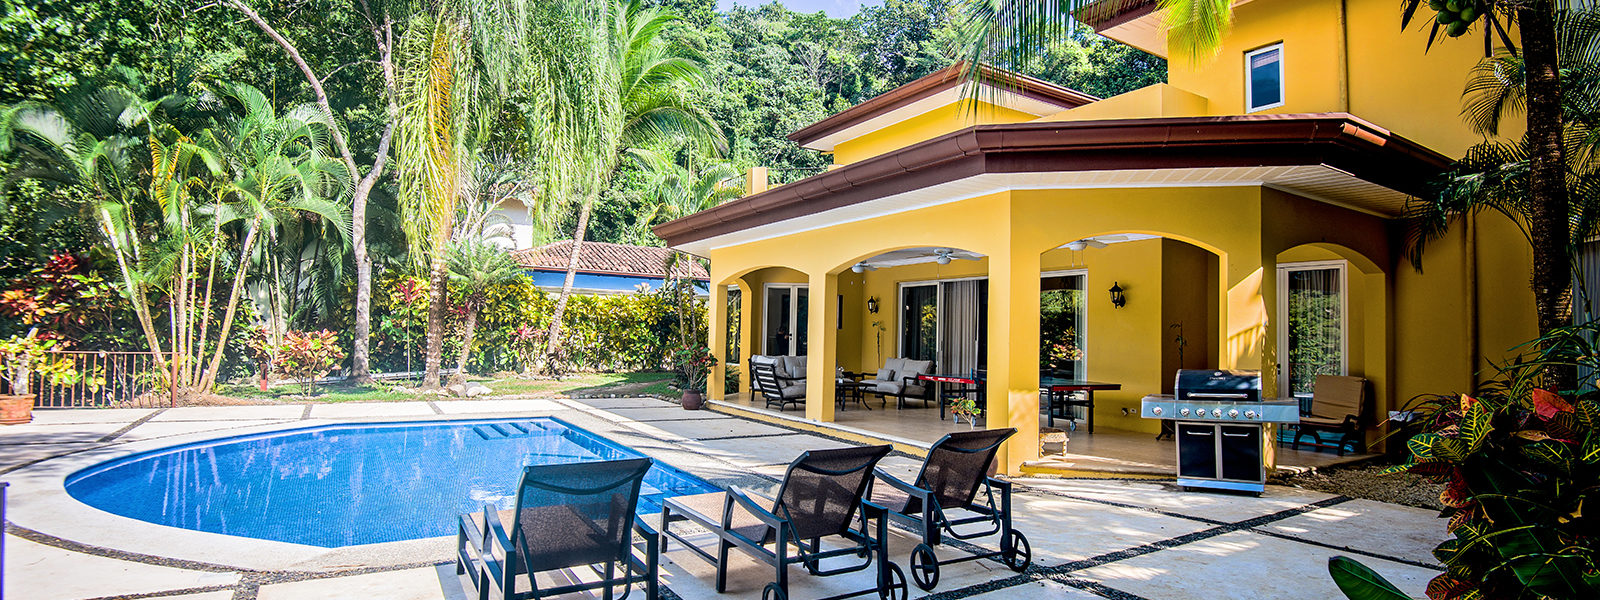 This lavish vacation home in Jaco offers a sun-drenched pool and patio with vibrant natural surroundings.